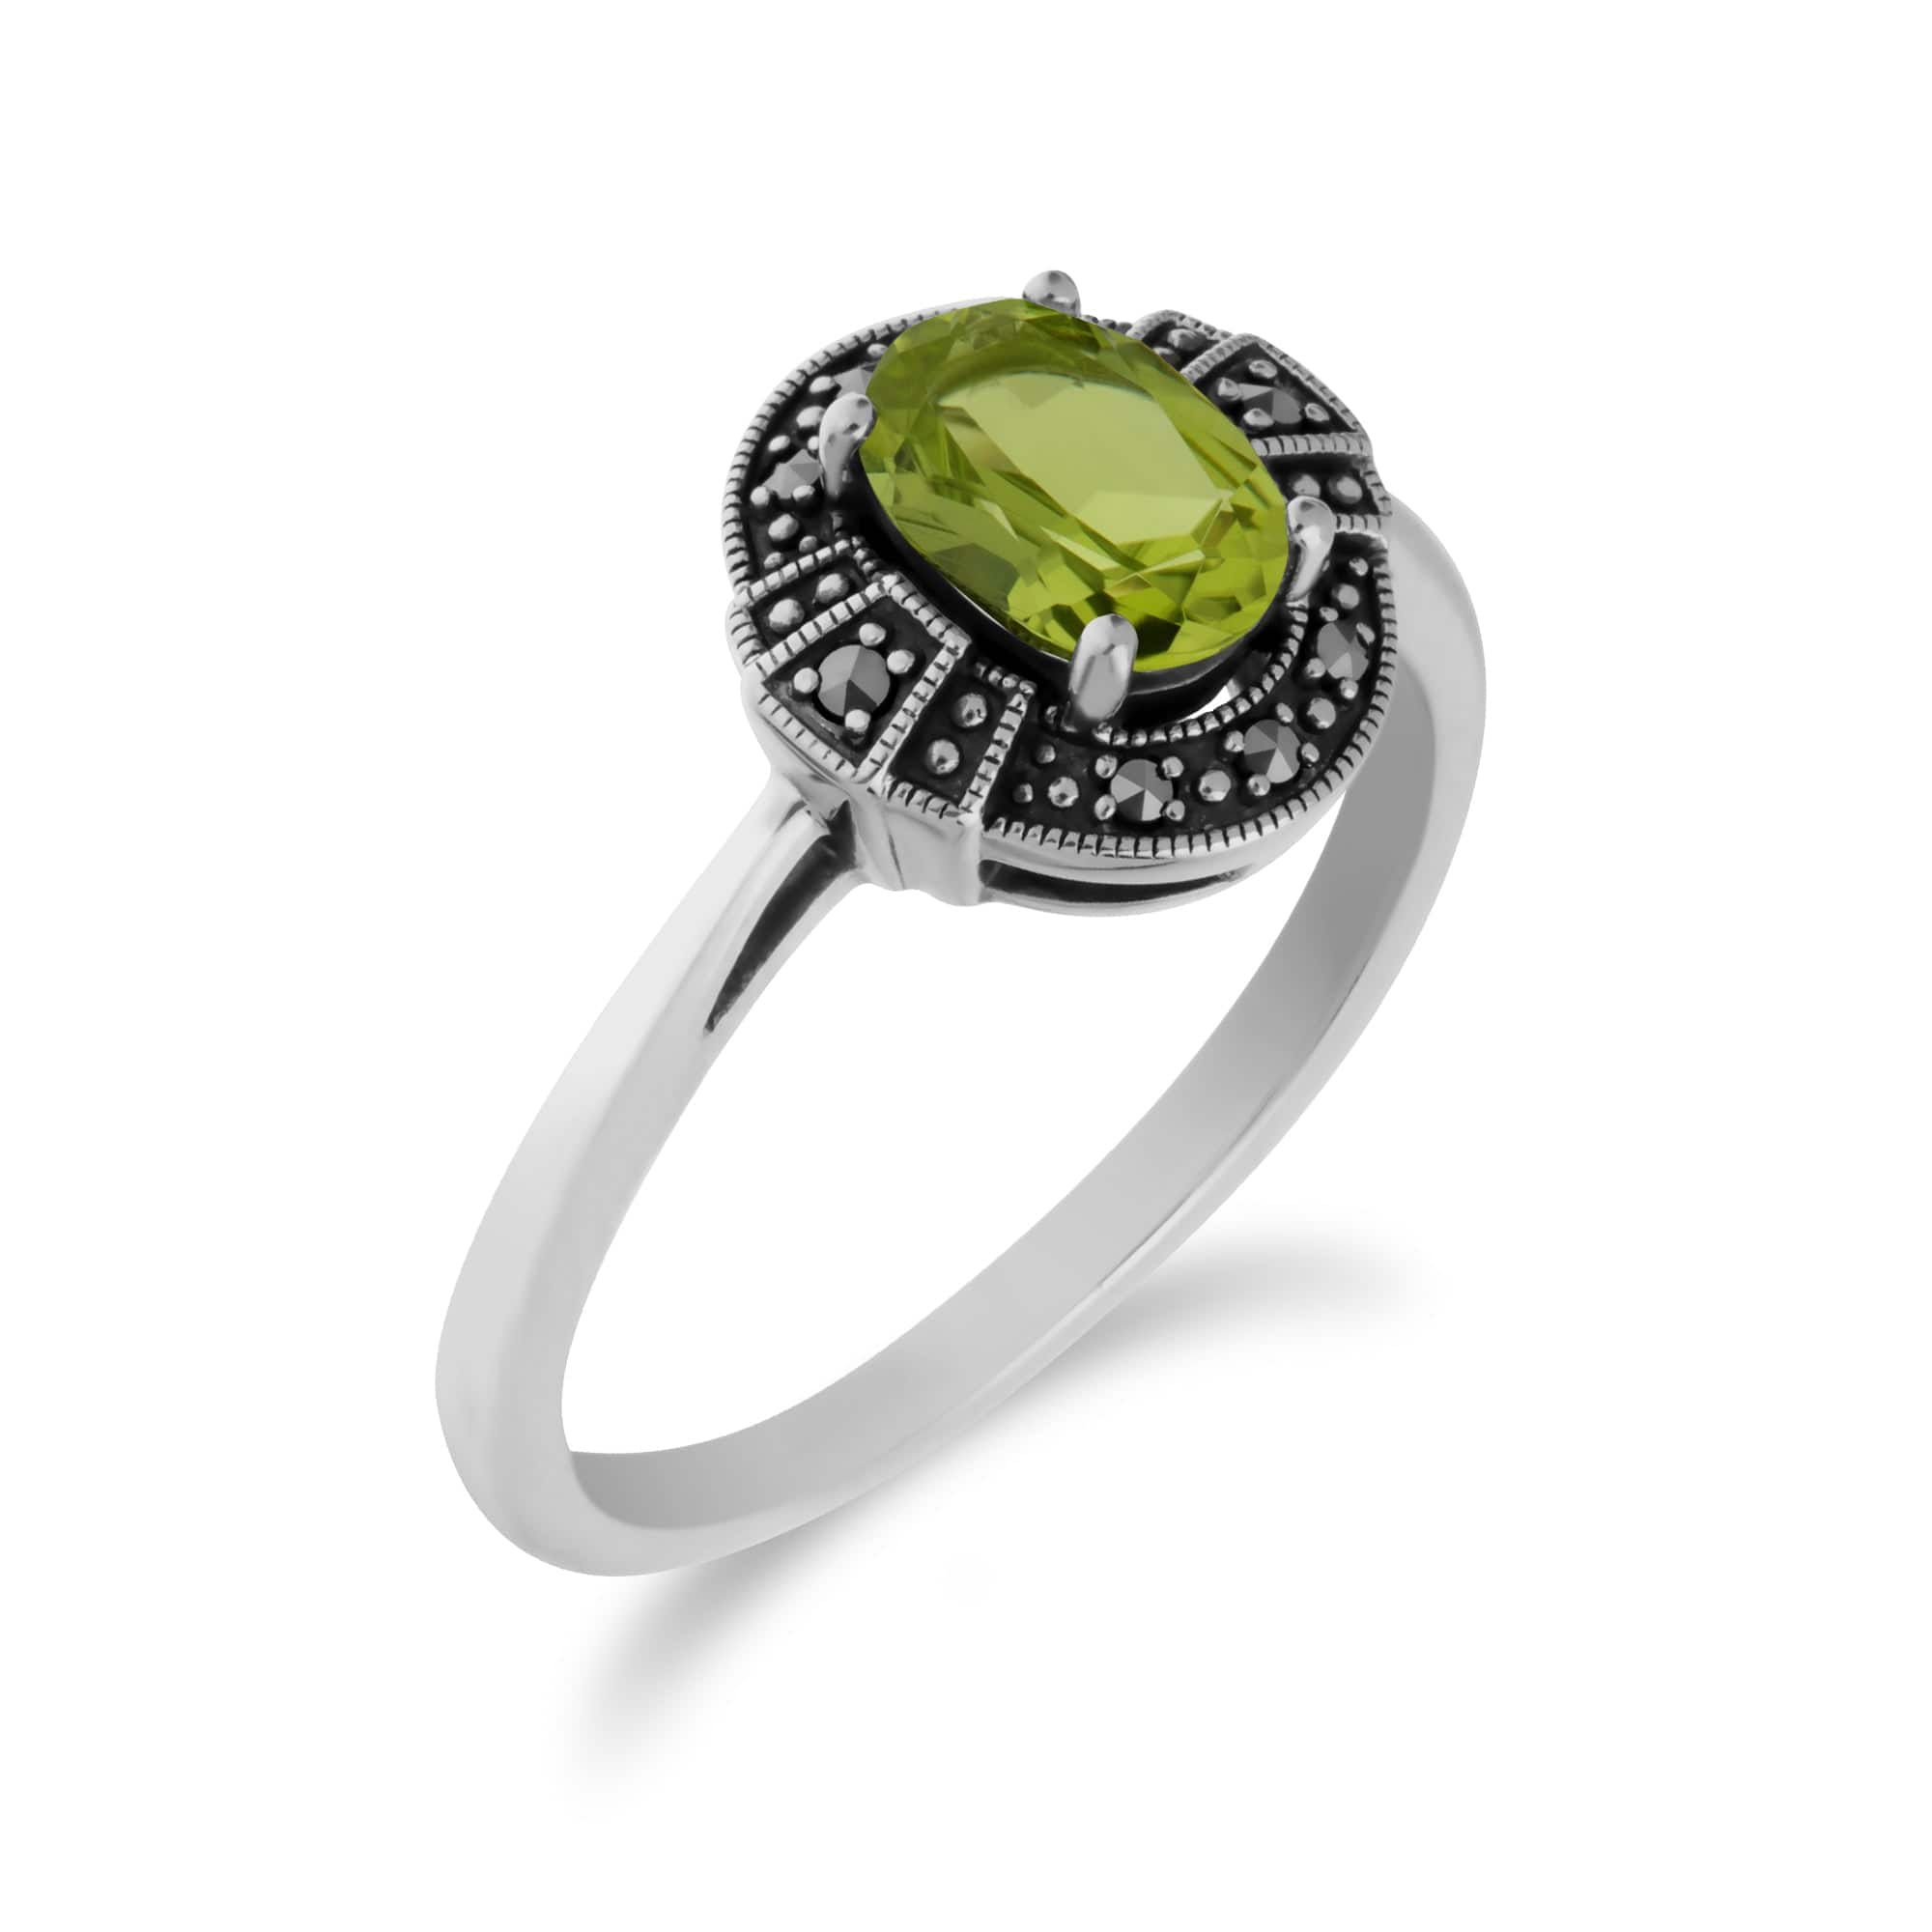 214R605704925 Art Deco Style Oval Peridot & Marcasite Halo Ring in 925 Sterling Silver 2